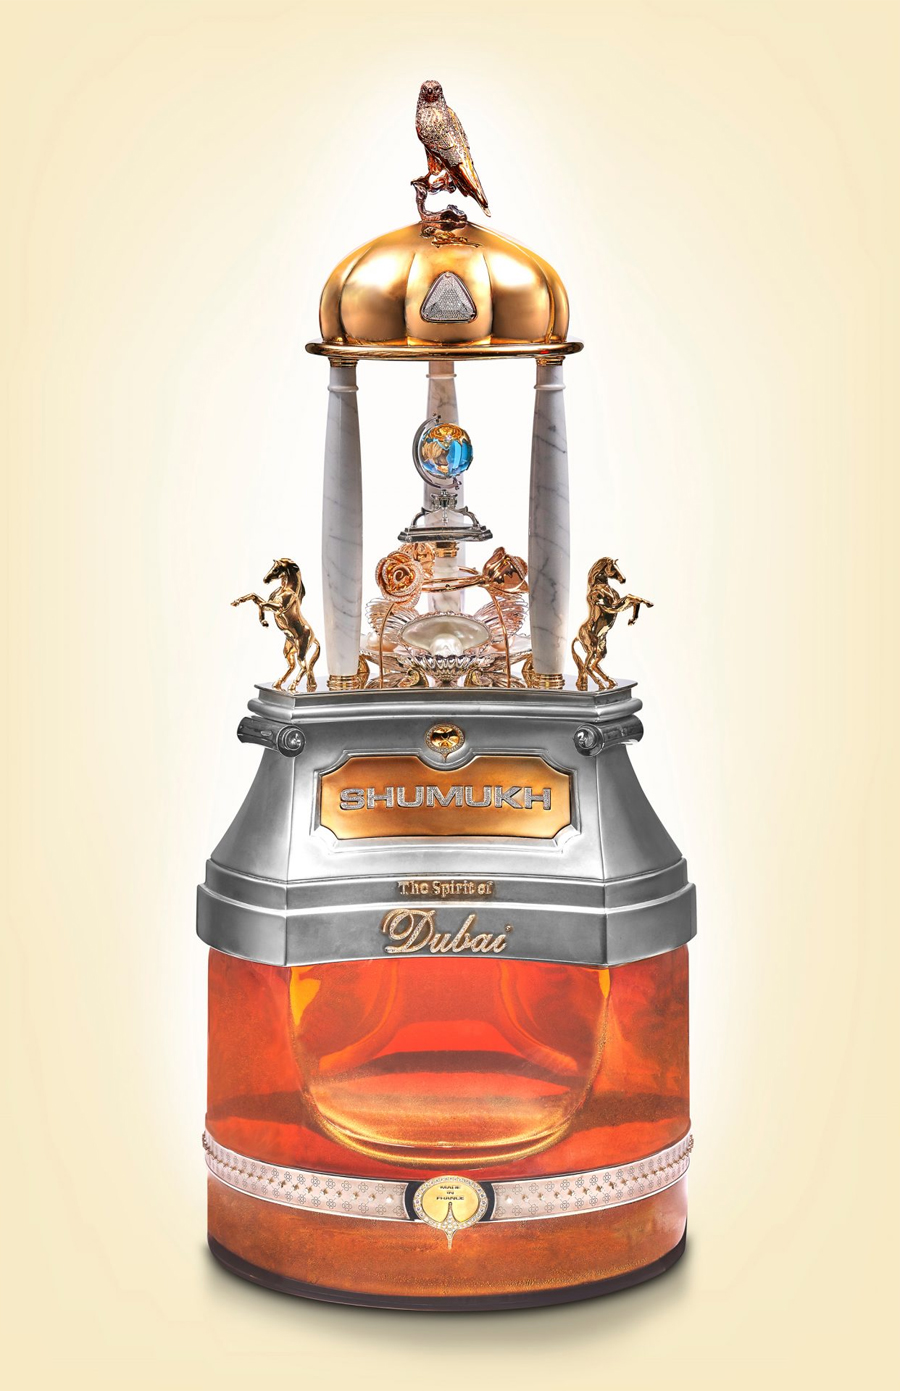 The Most Expensive Perfume in the World - Shumukh by Nabeel - $1.3 million